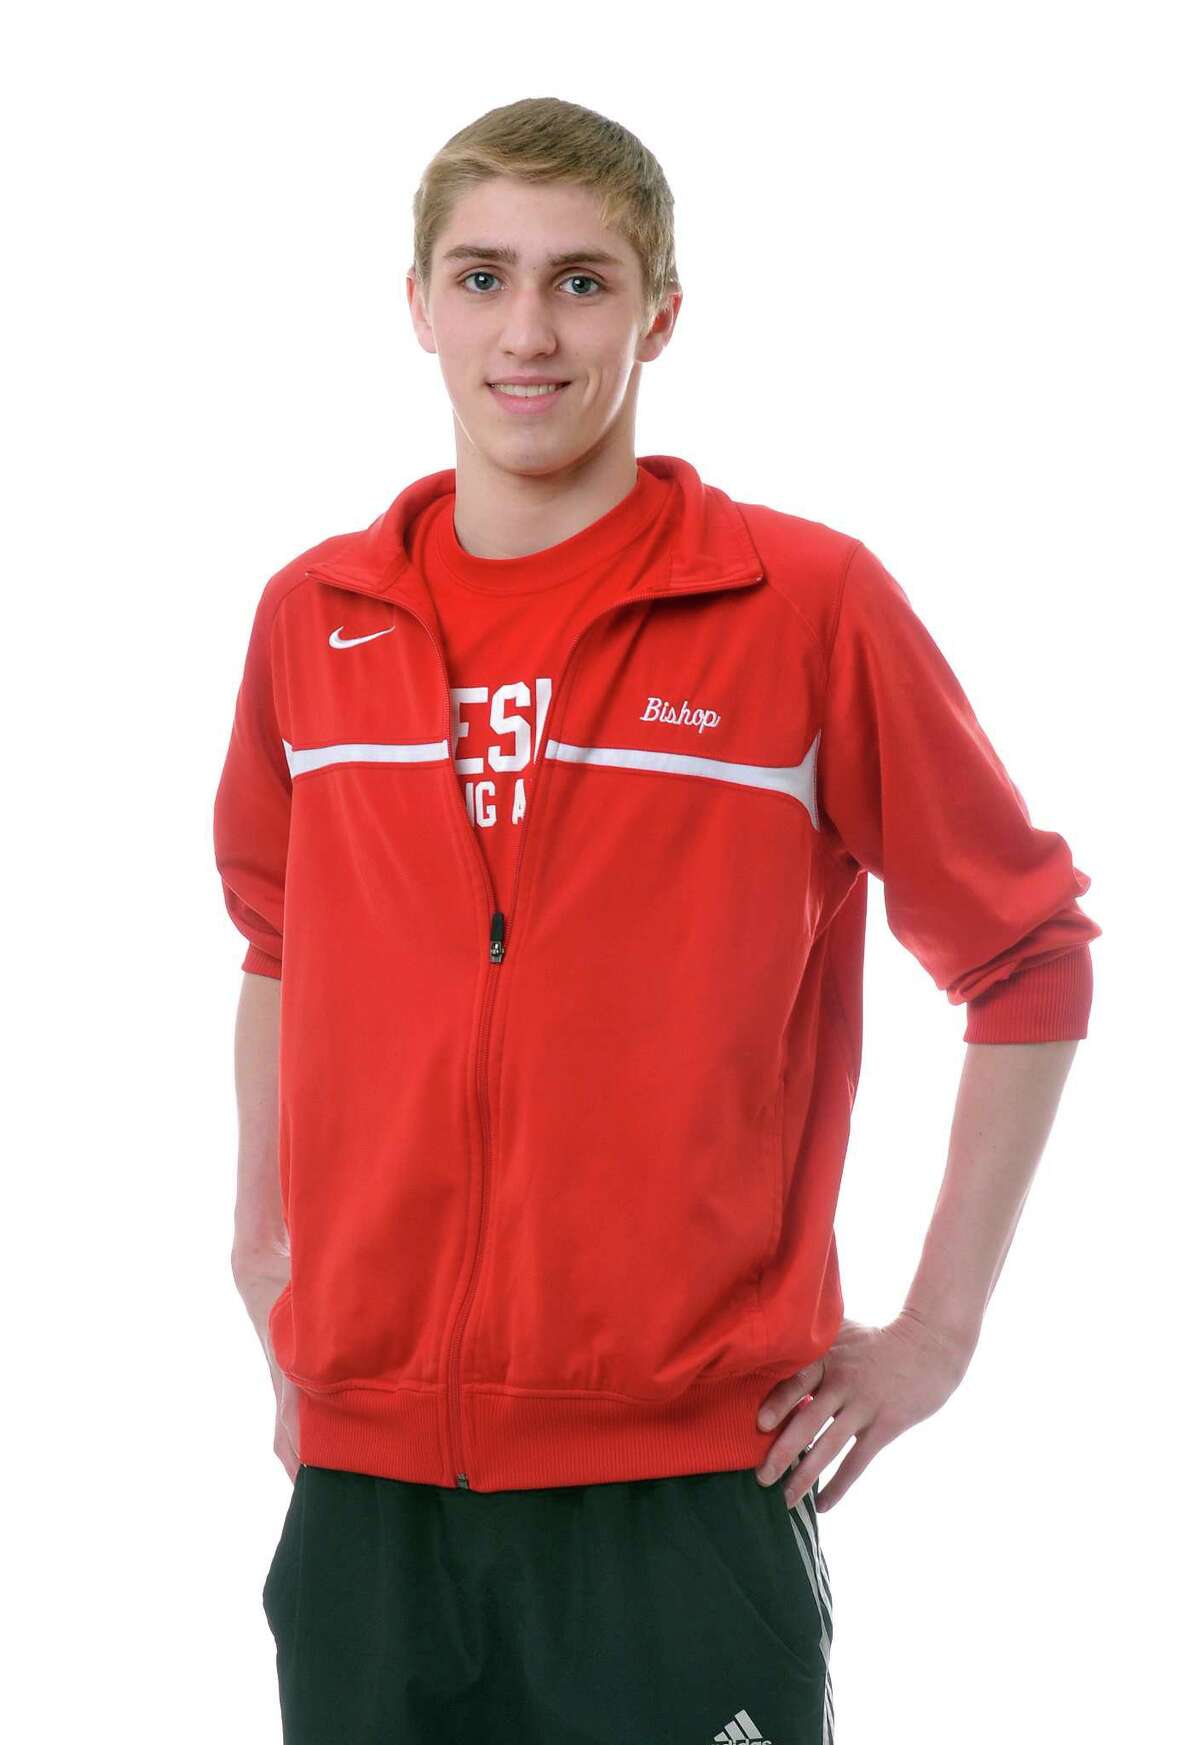 (Peter Casolino-New Haven Register) All Area Swimming,Karl Bishop, Cheshire. 3/28/14